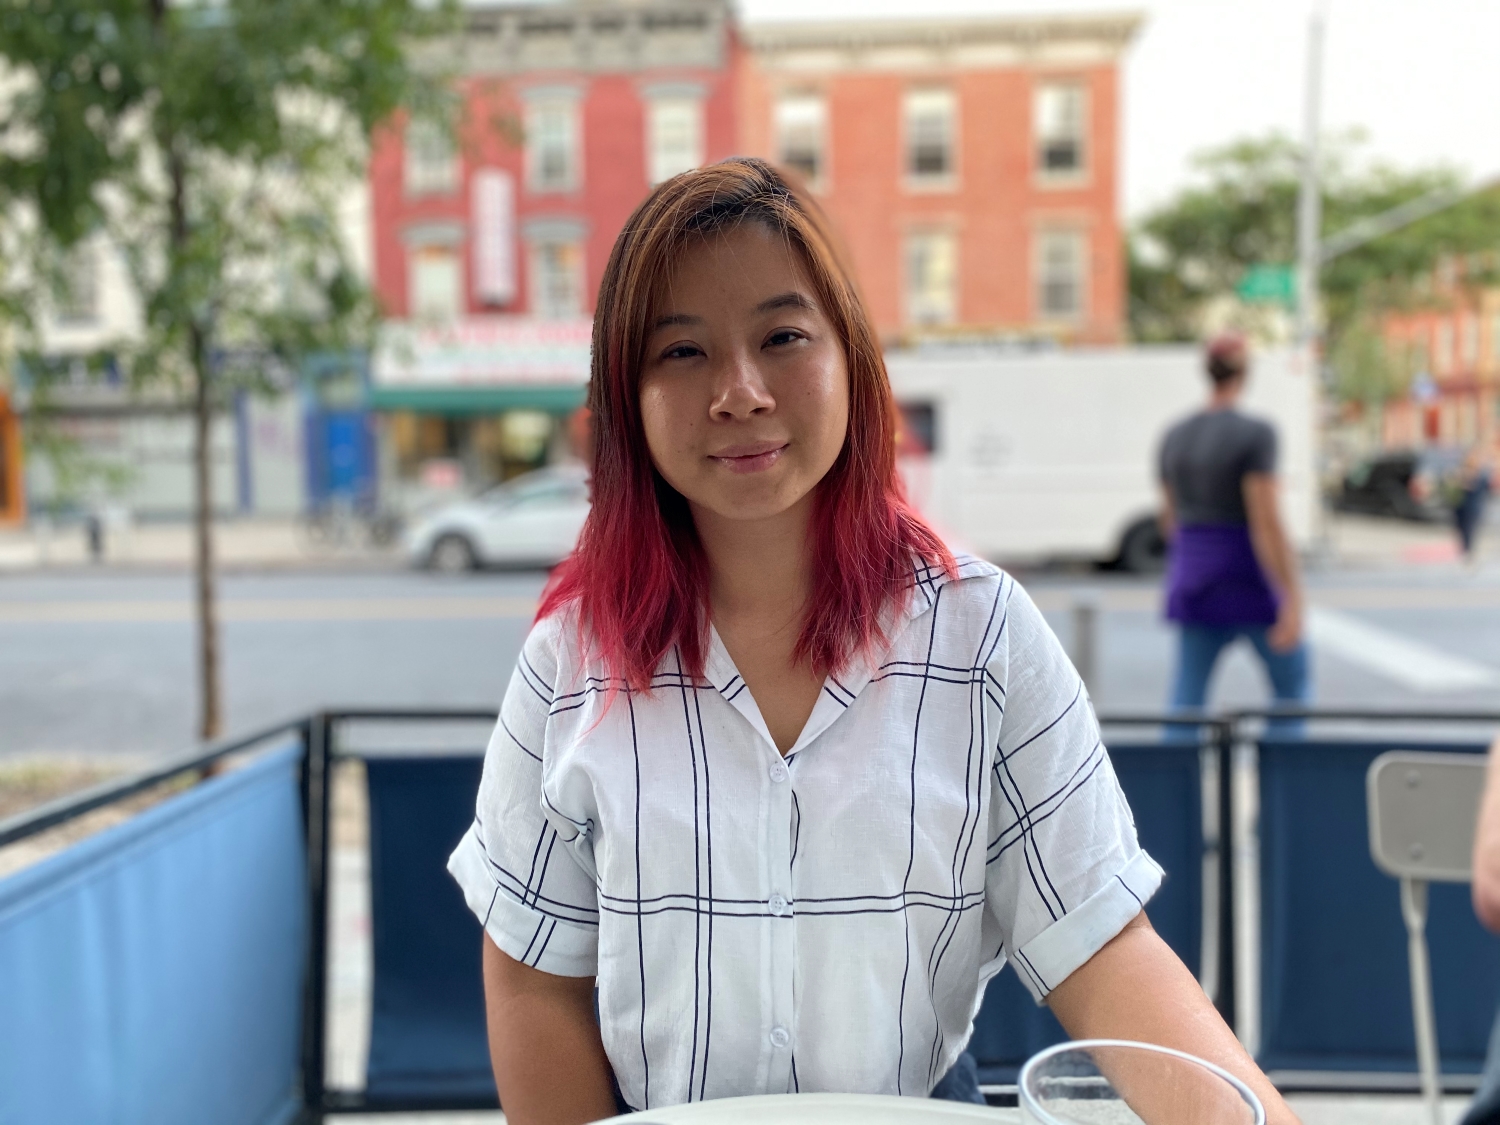 iphone 11 pro max review dinner portrait mode girl